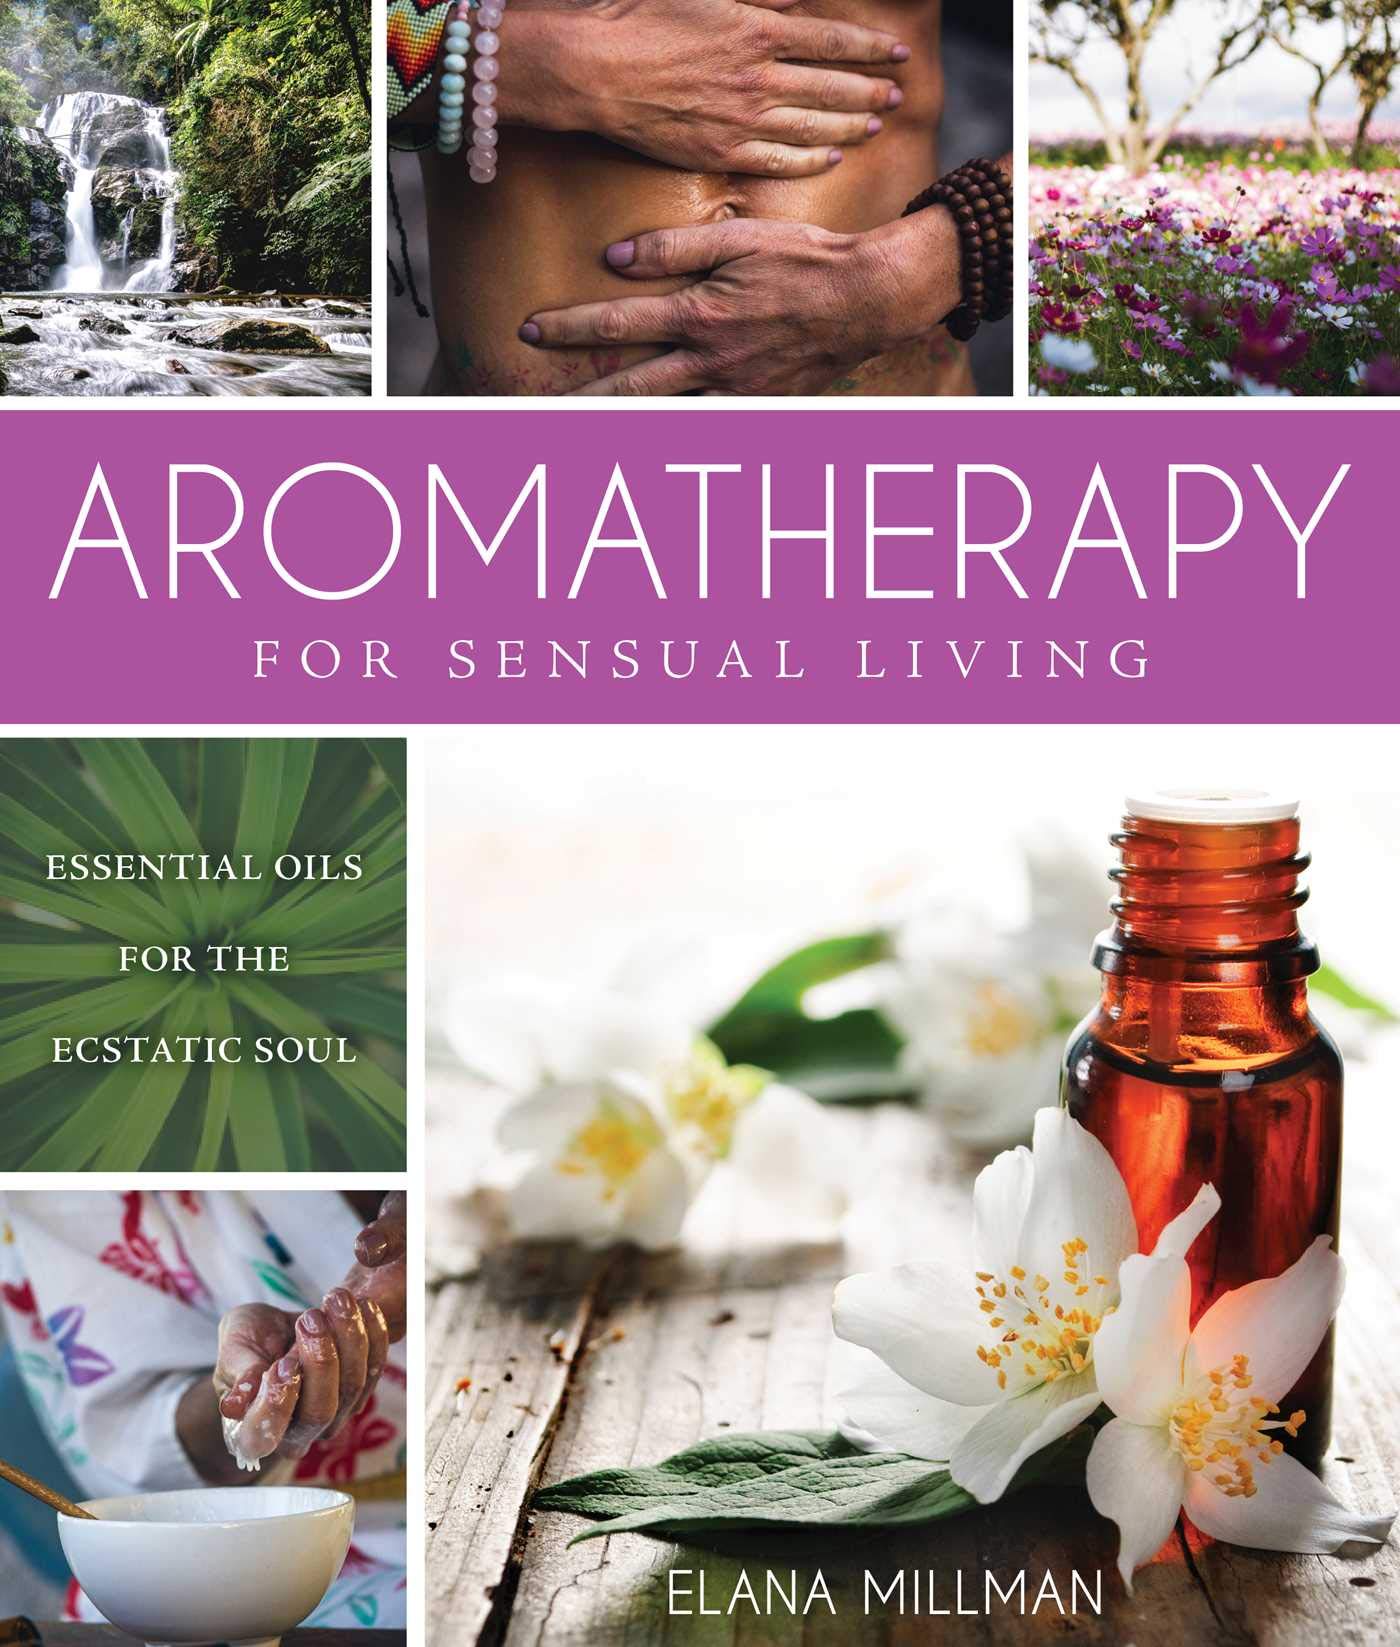 Aromatherapy For Sensual Living